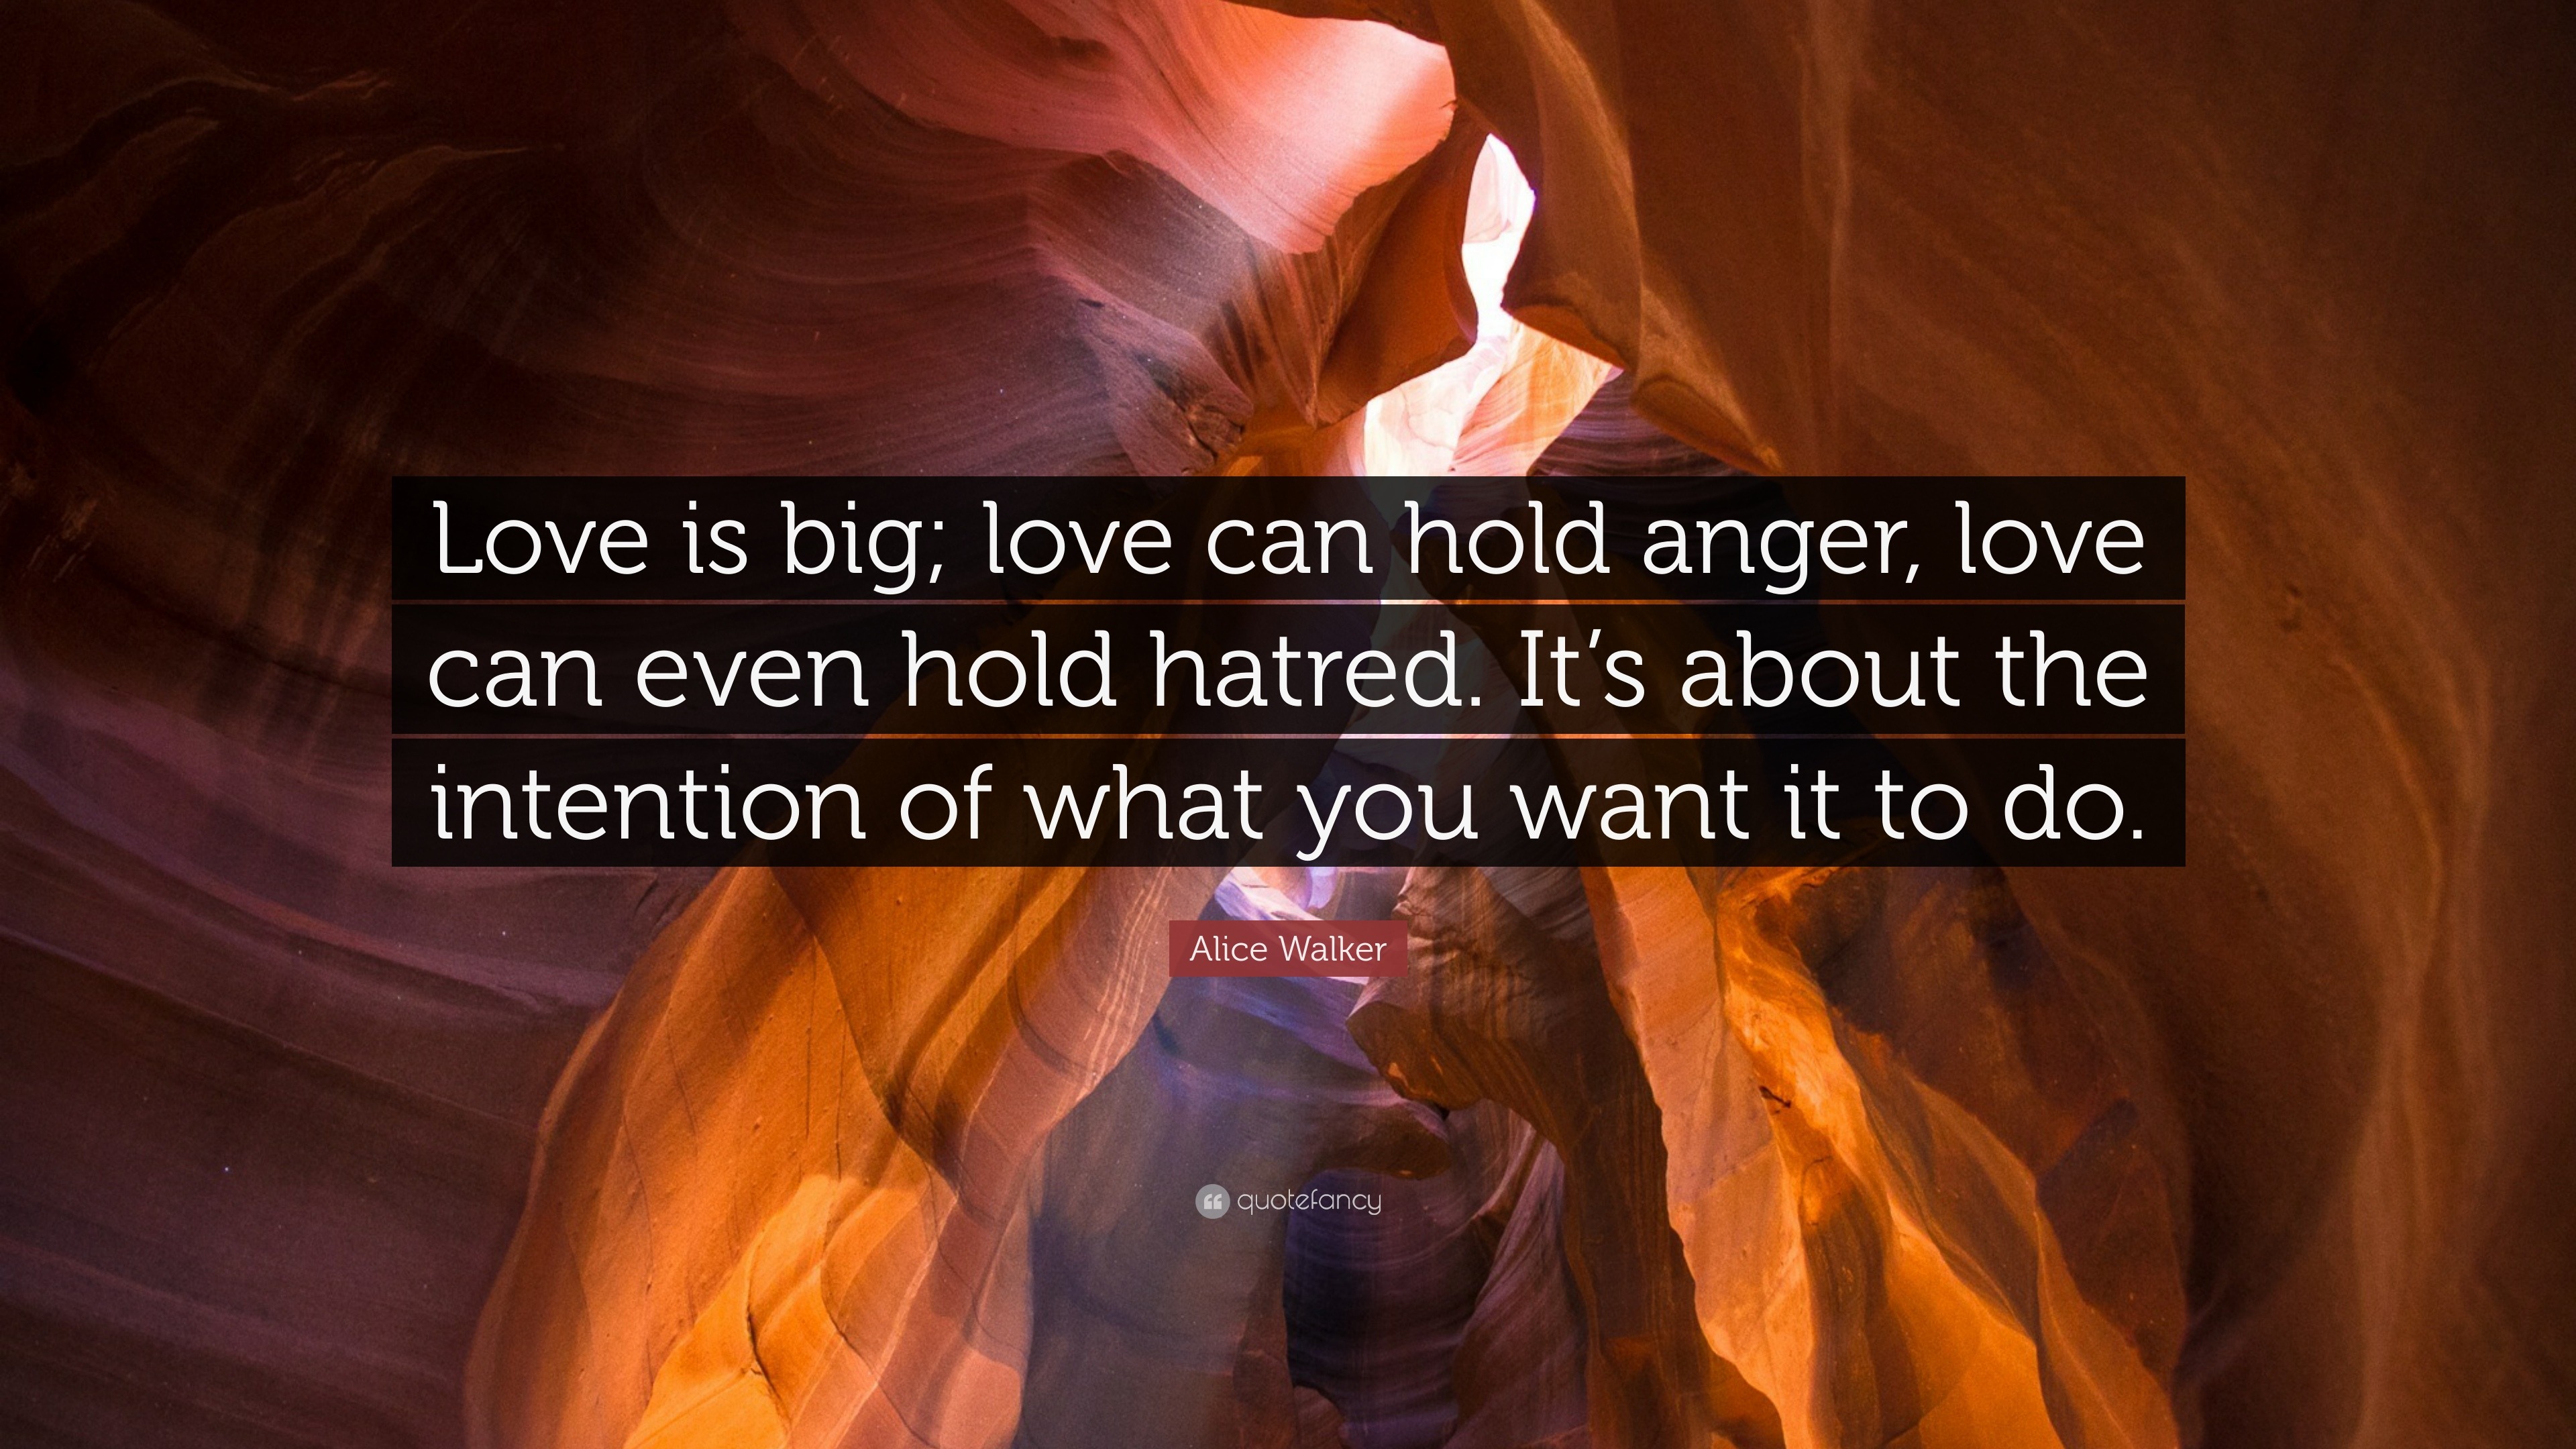 Alice Walker Quote: “Love is big; love can hold anger, love can even hold  hatred. It's